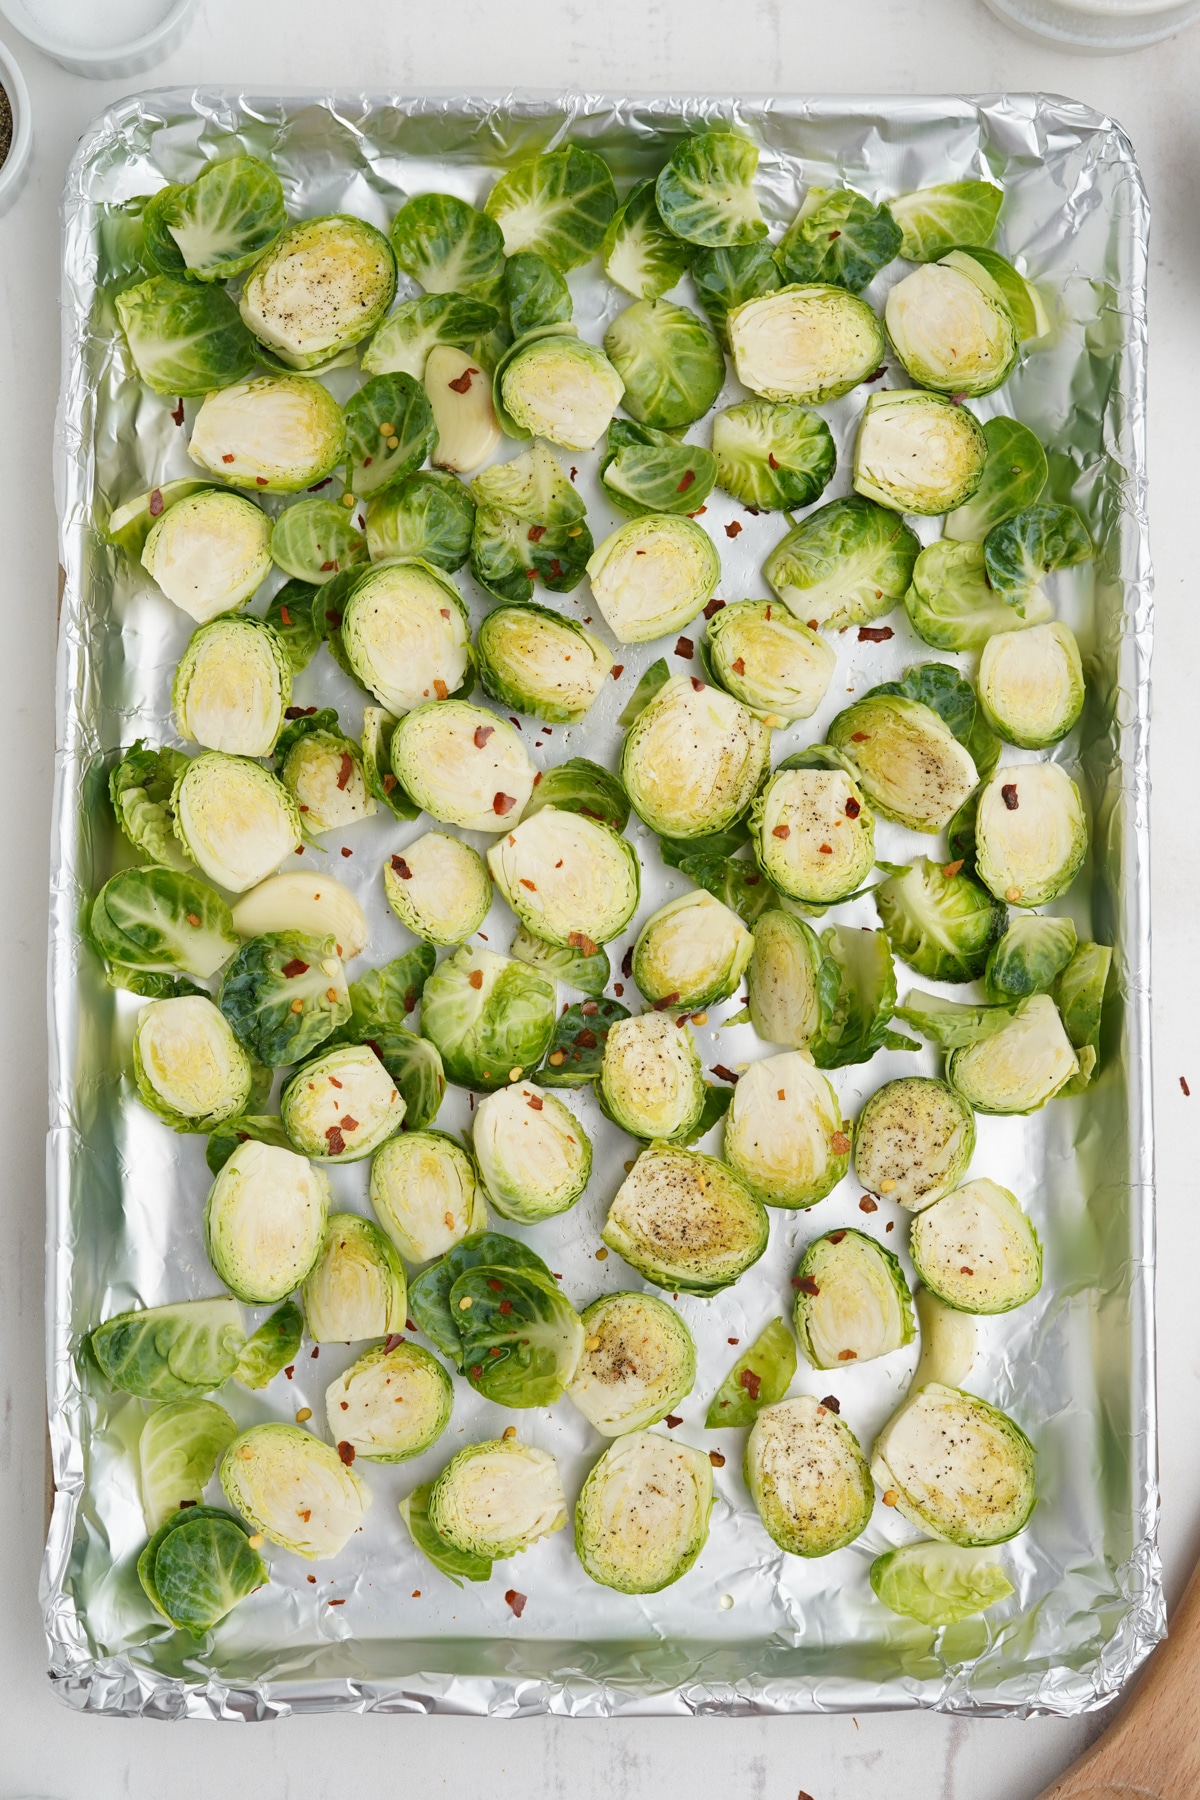 Brussels sprouts on a baking tray.